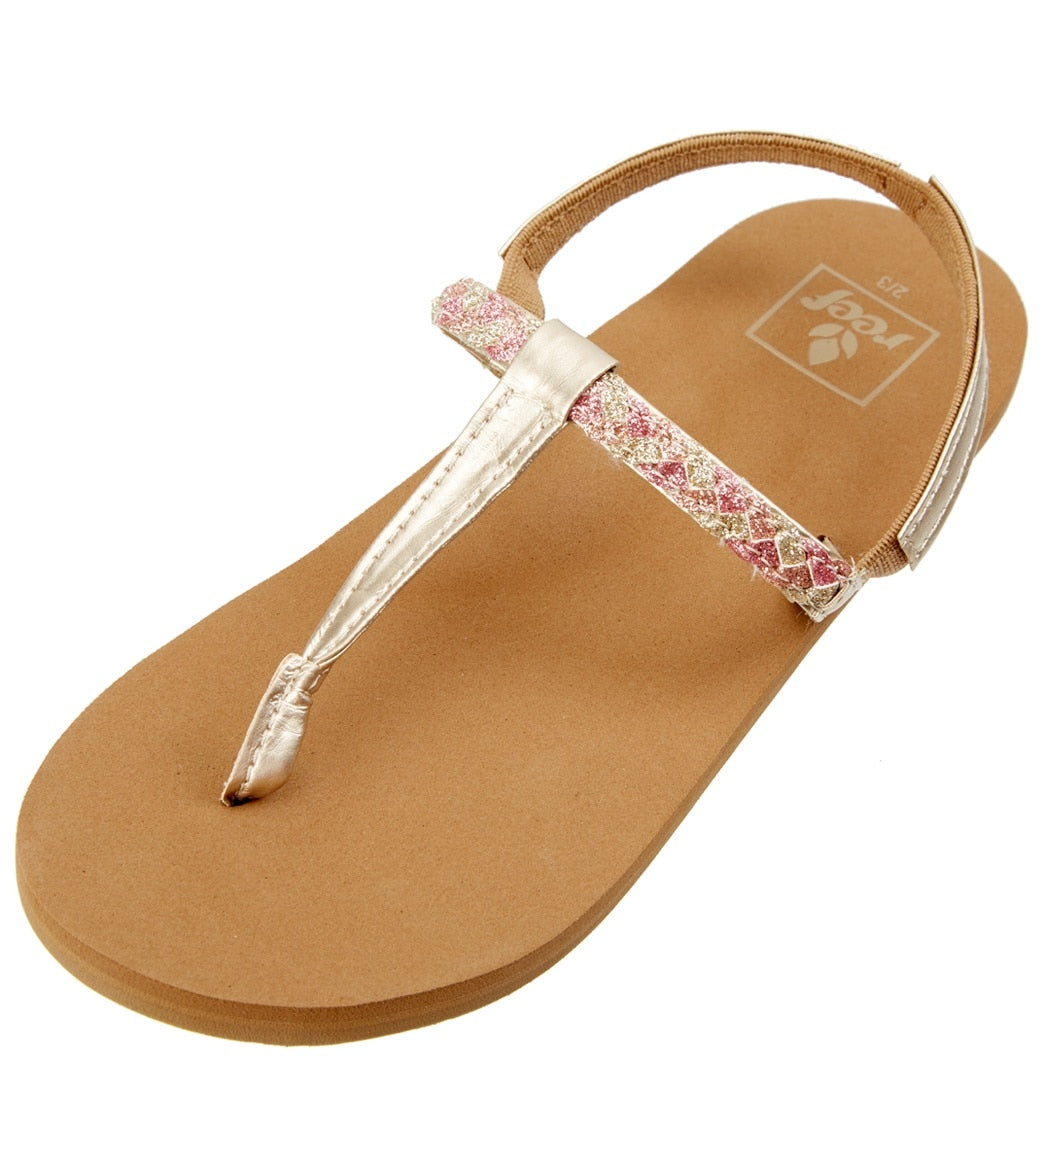 Reef Girls' Little Twisted T Strap Sandals Toddler Kid Big Kid - Tan/Pink 9/10 - Swimoutlet.com